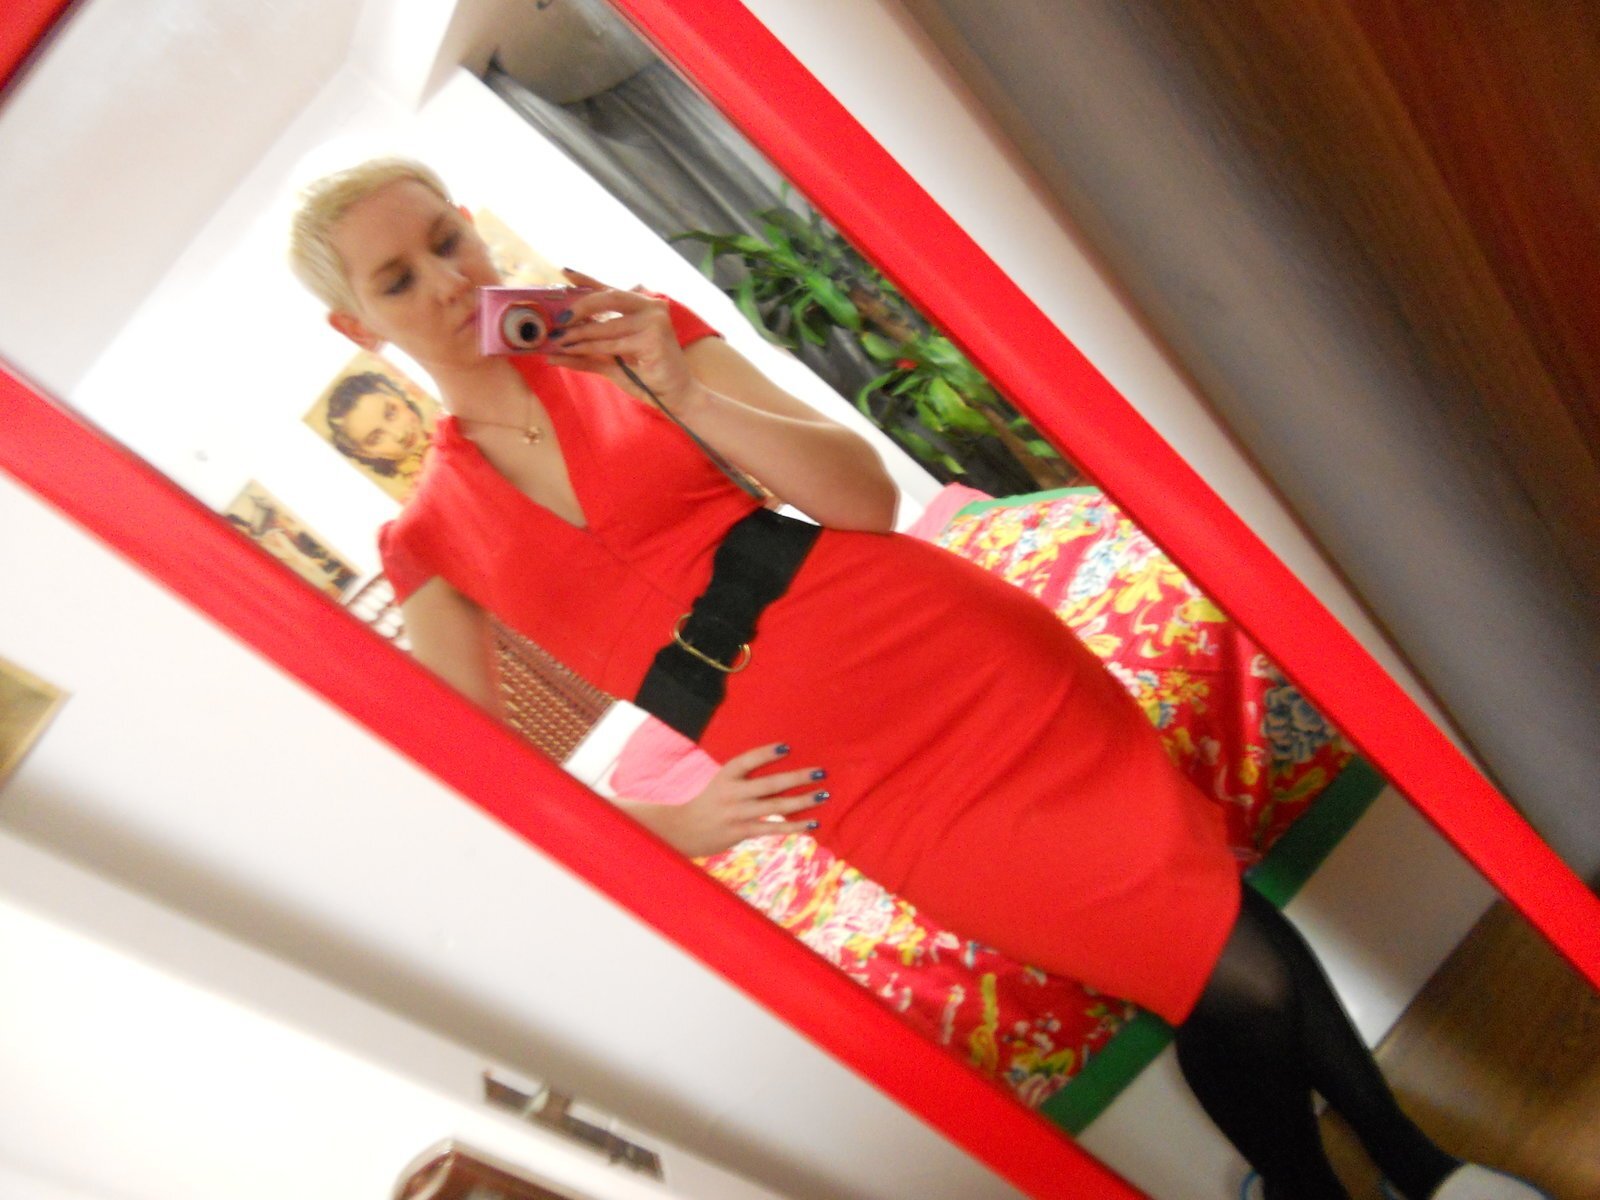 lets go out - it's snowing and I've got a new dress!!